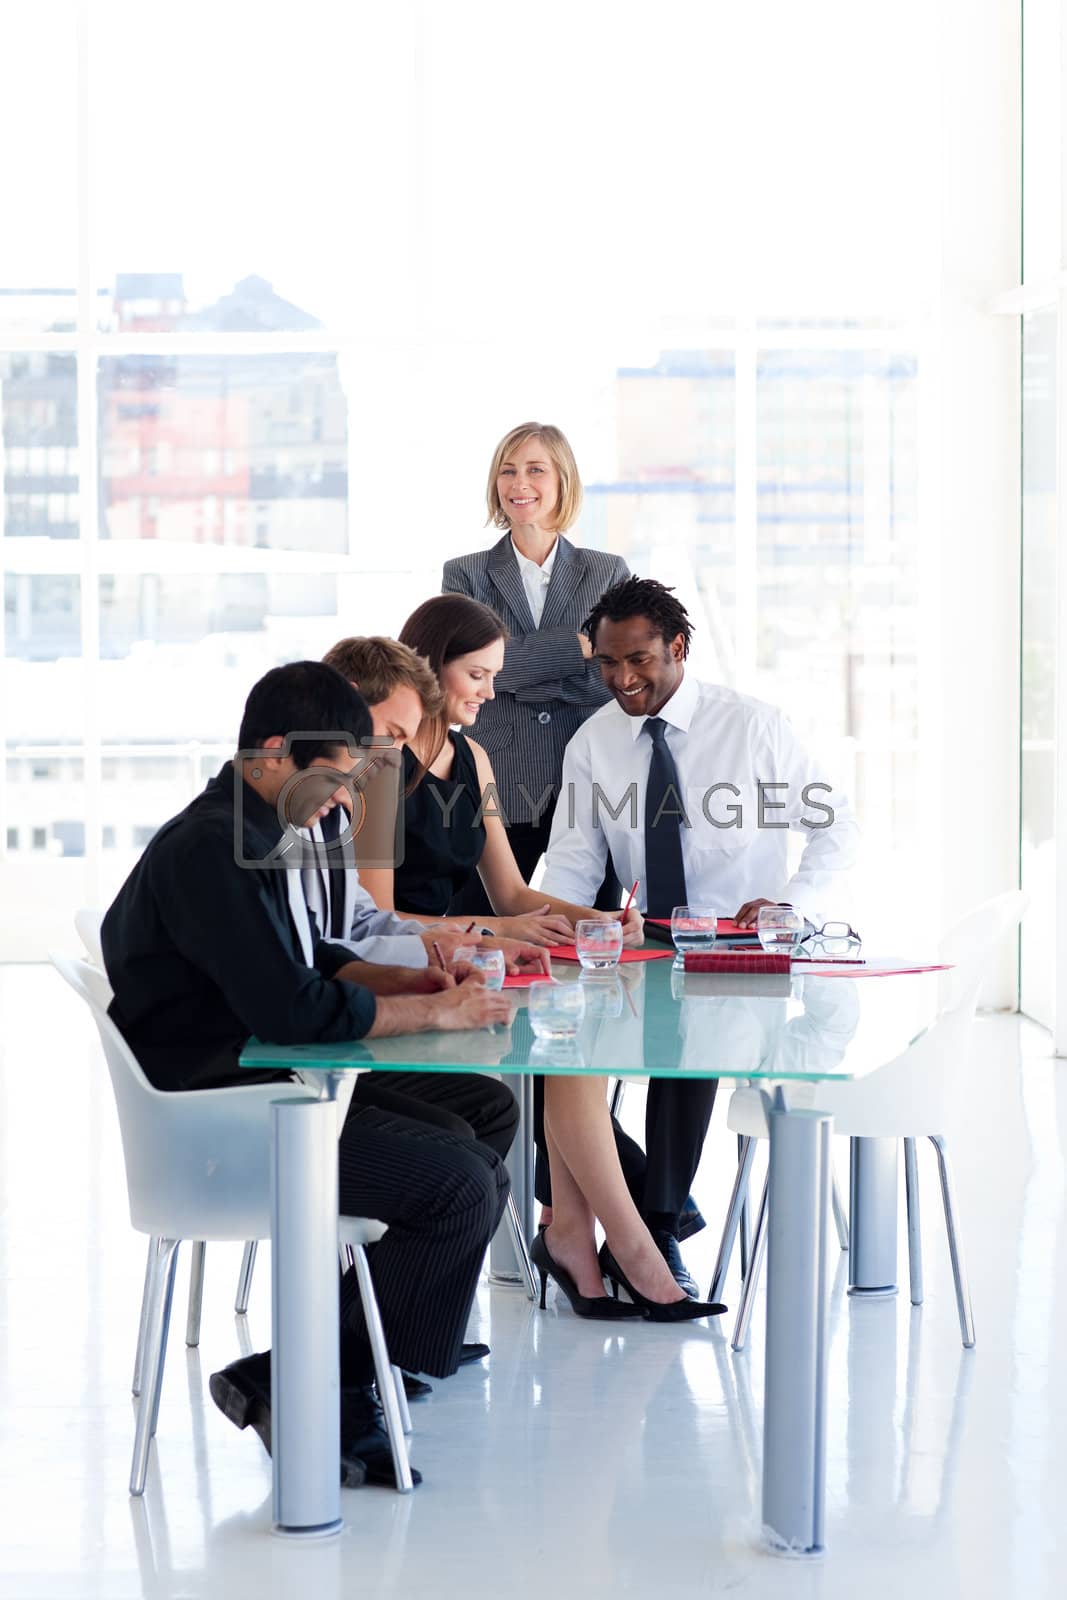 Royalty free image of Leadership with her team in a meeting by Wavebreakmedia